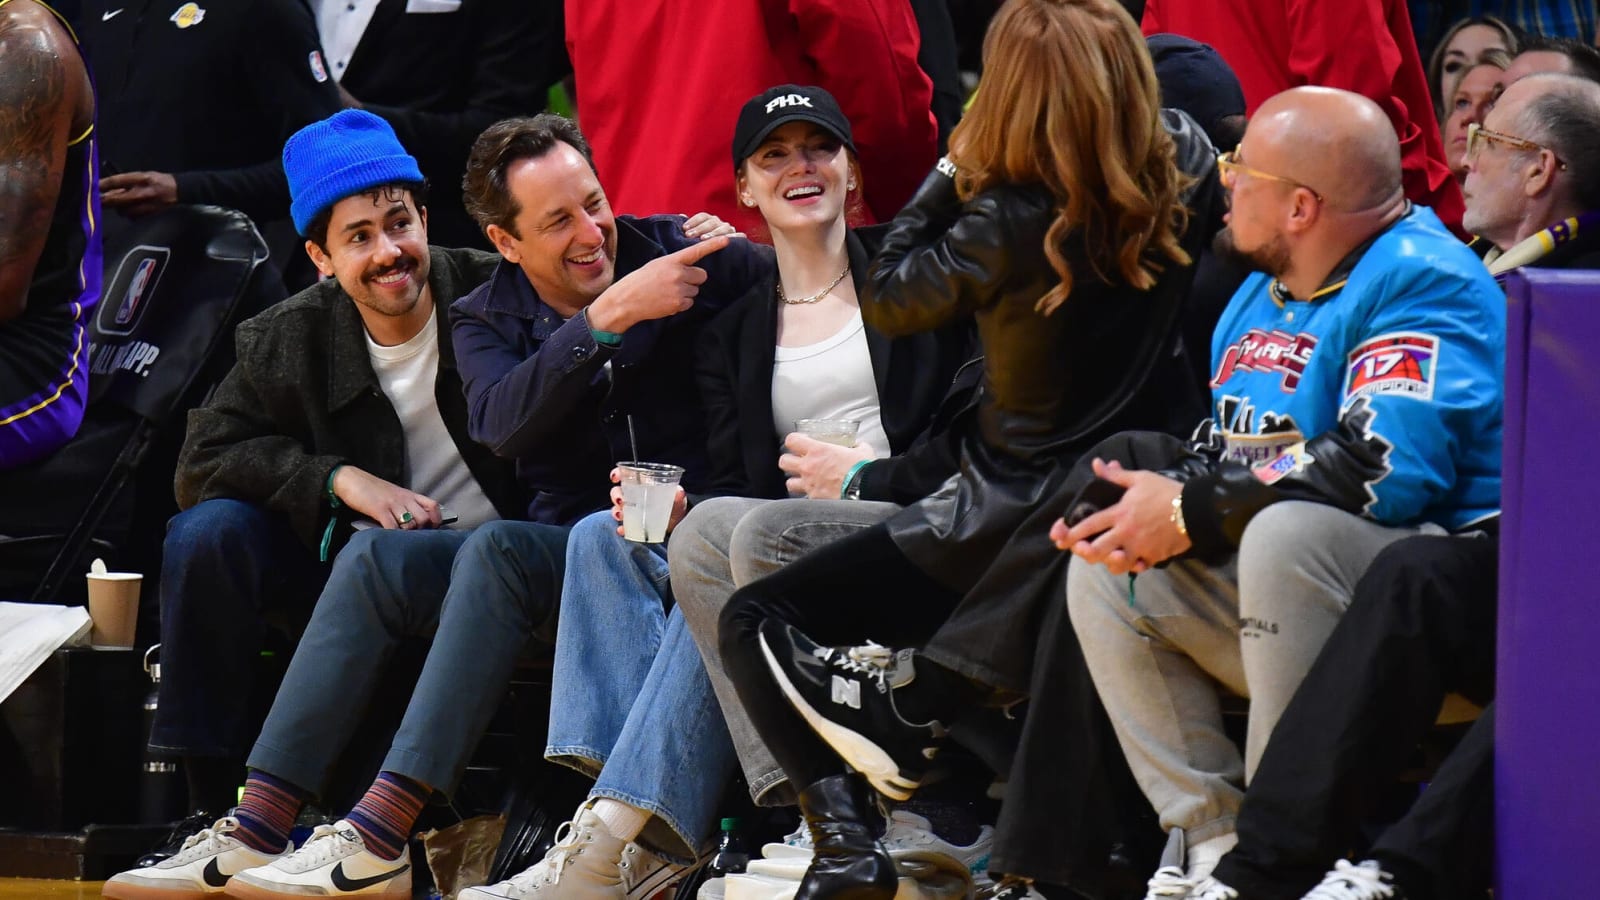 Watch: 'We were unfamiliar with your game' – Hollywood heart throb Emma Stone allegedly saying goodbye to Grayson Allen leaves Phoenix Suns bench impressed